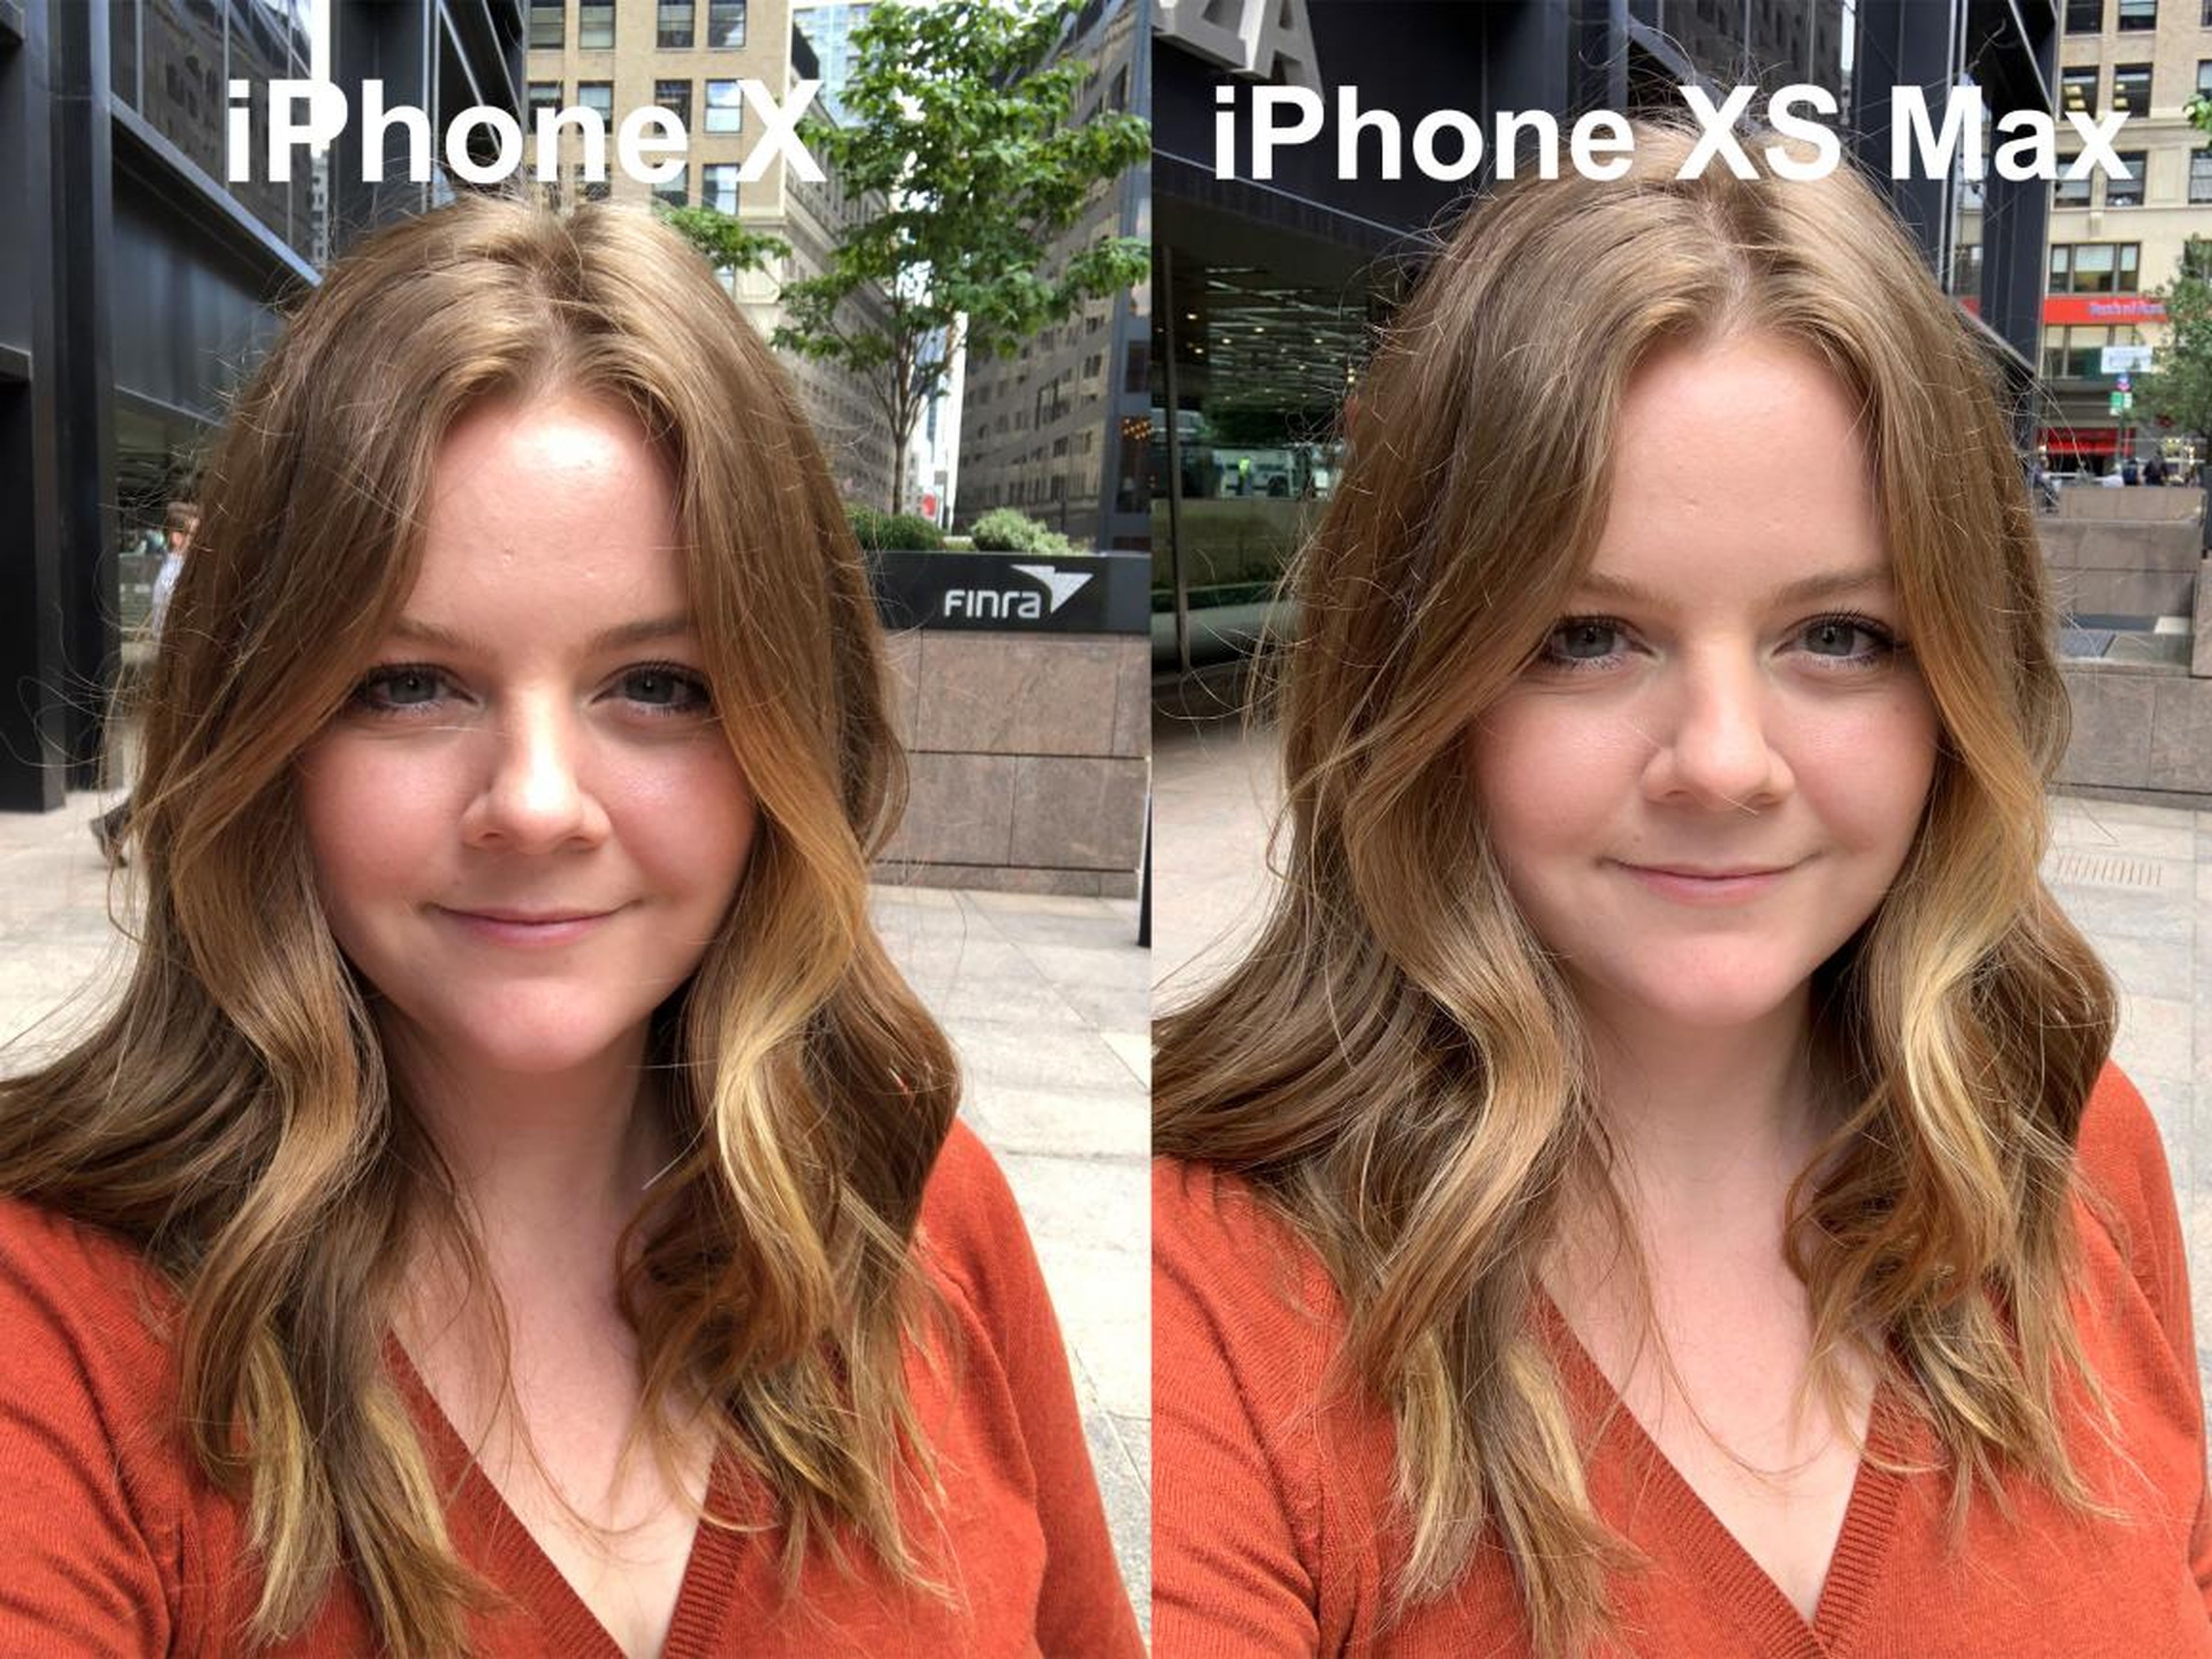 In a bright outdoor environment, Avery's face was still smoothed out, which doesn't align with the noise-reduction theory. Colors were also greatly evened out in the iPhone XS selfie.